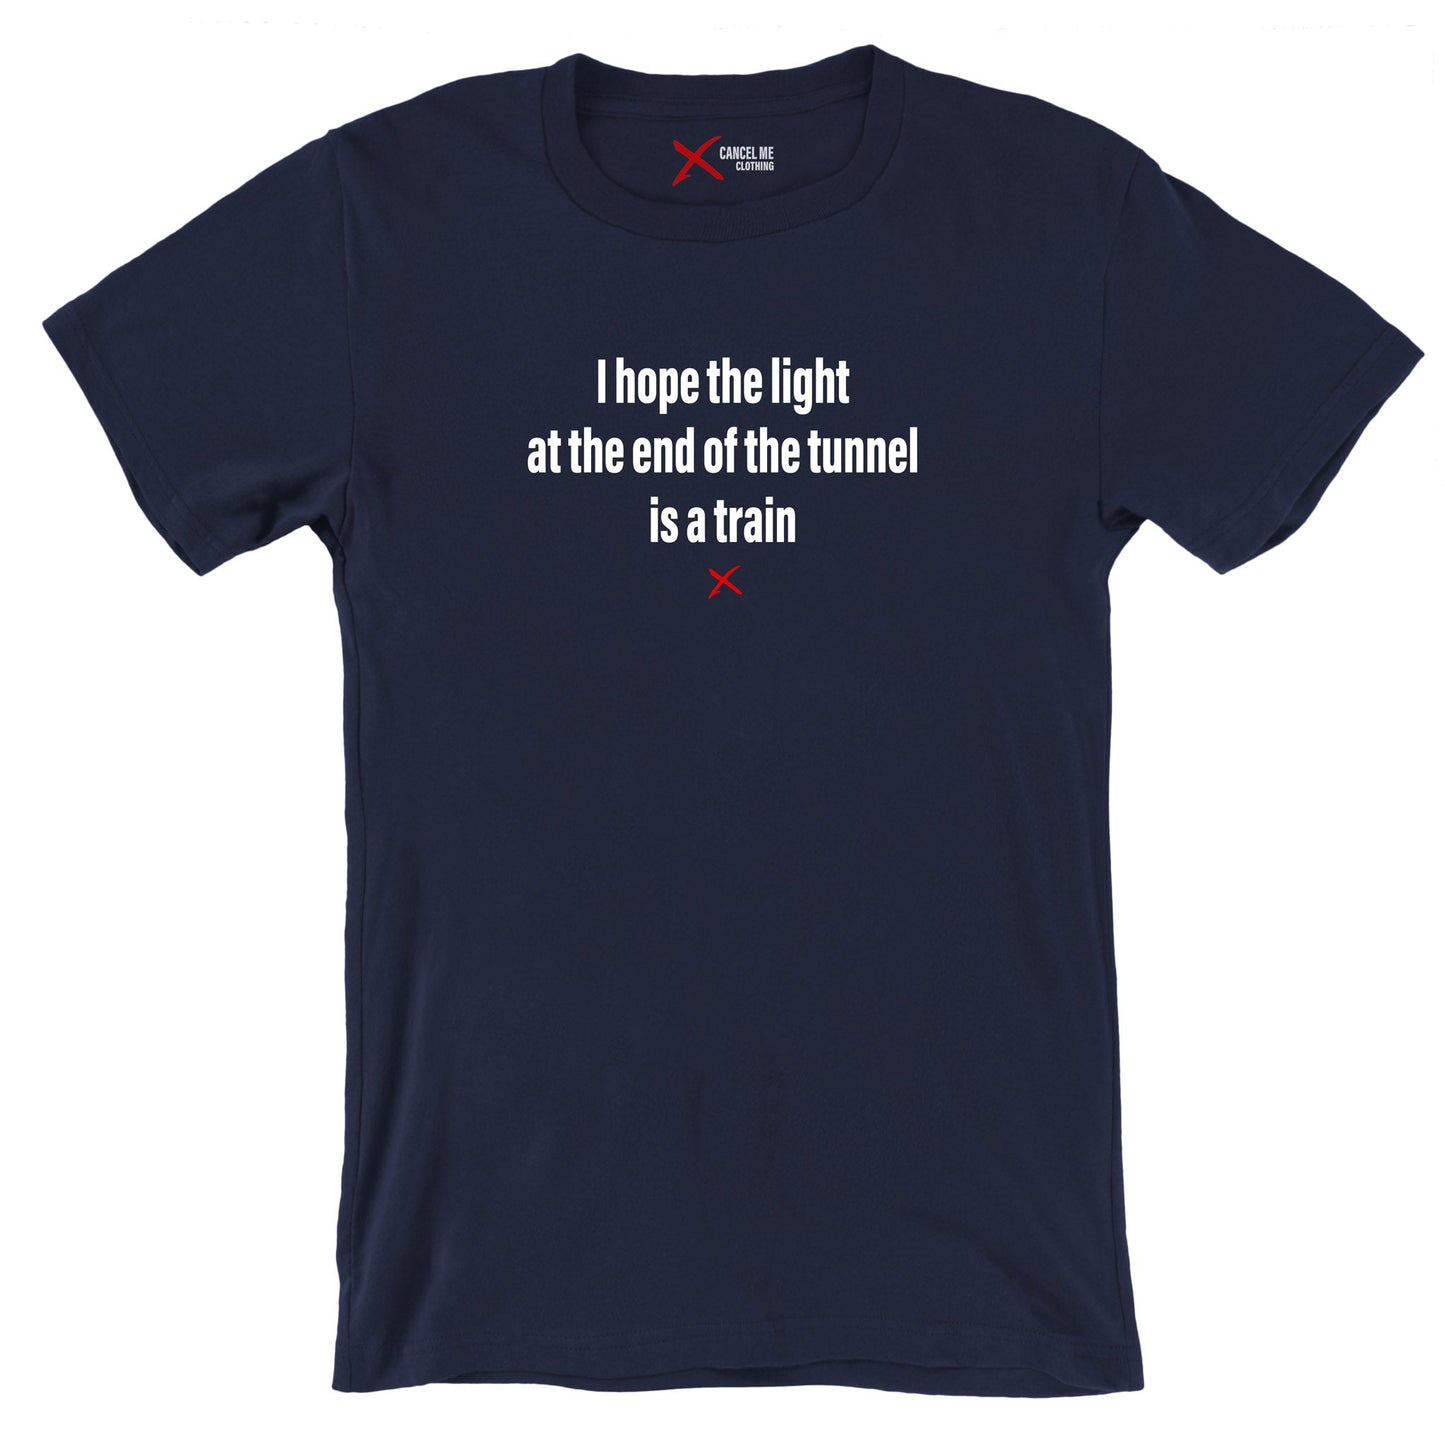 I hope the light at the end of the tunnel is a train - Shirt